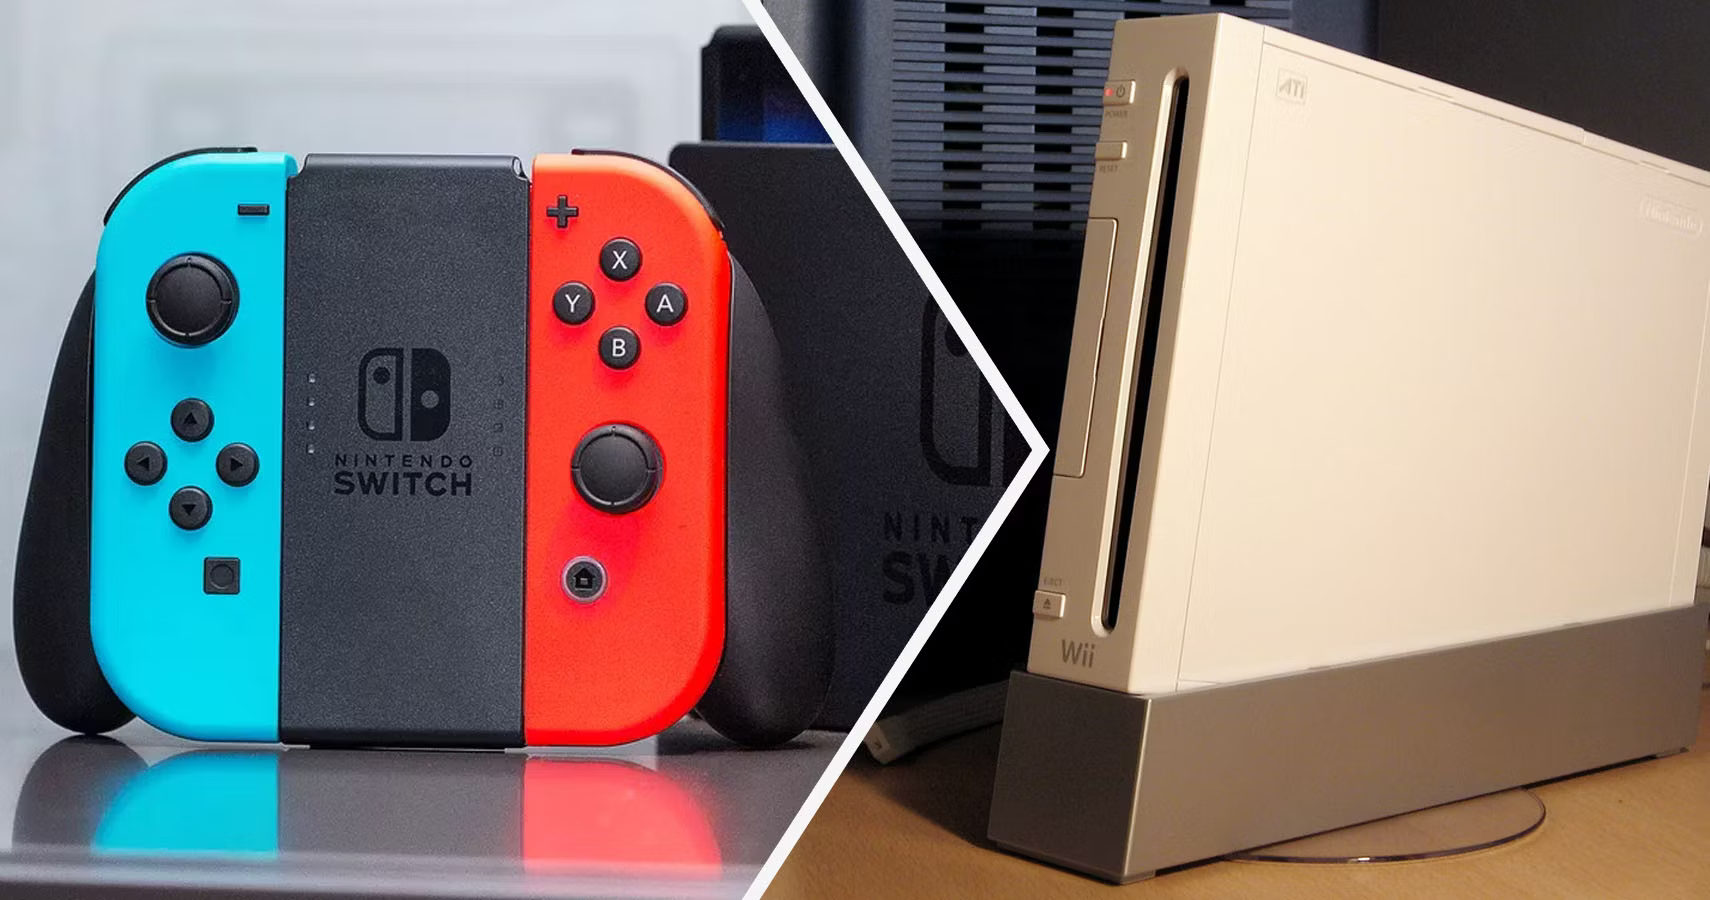 Nintendo Switch sales surpass lifetime Nintendo Wii sales in the US | Page  5 | GBAtemp.net - The Independent Video Game Community